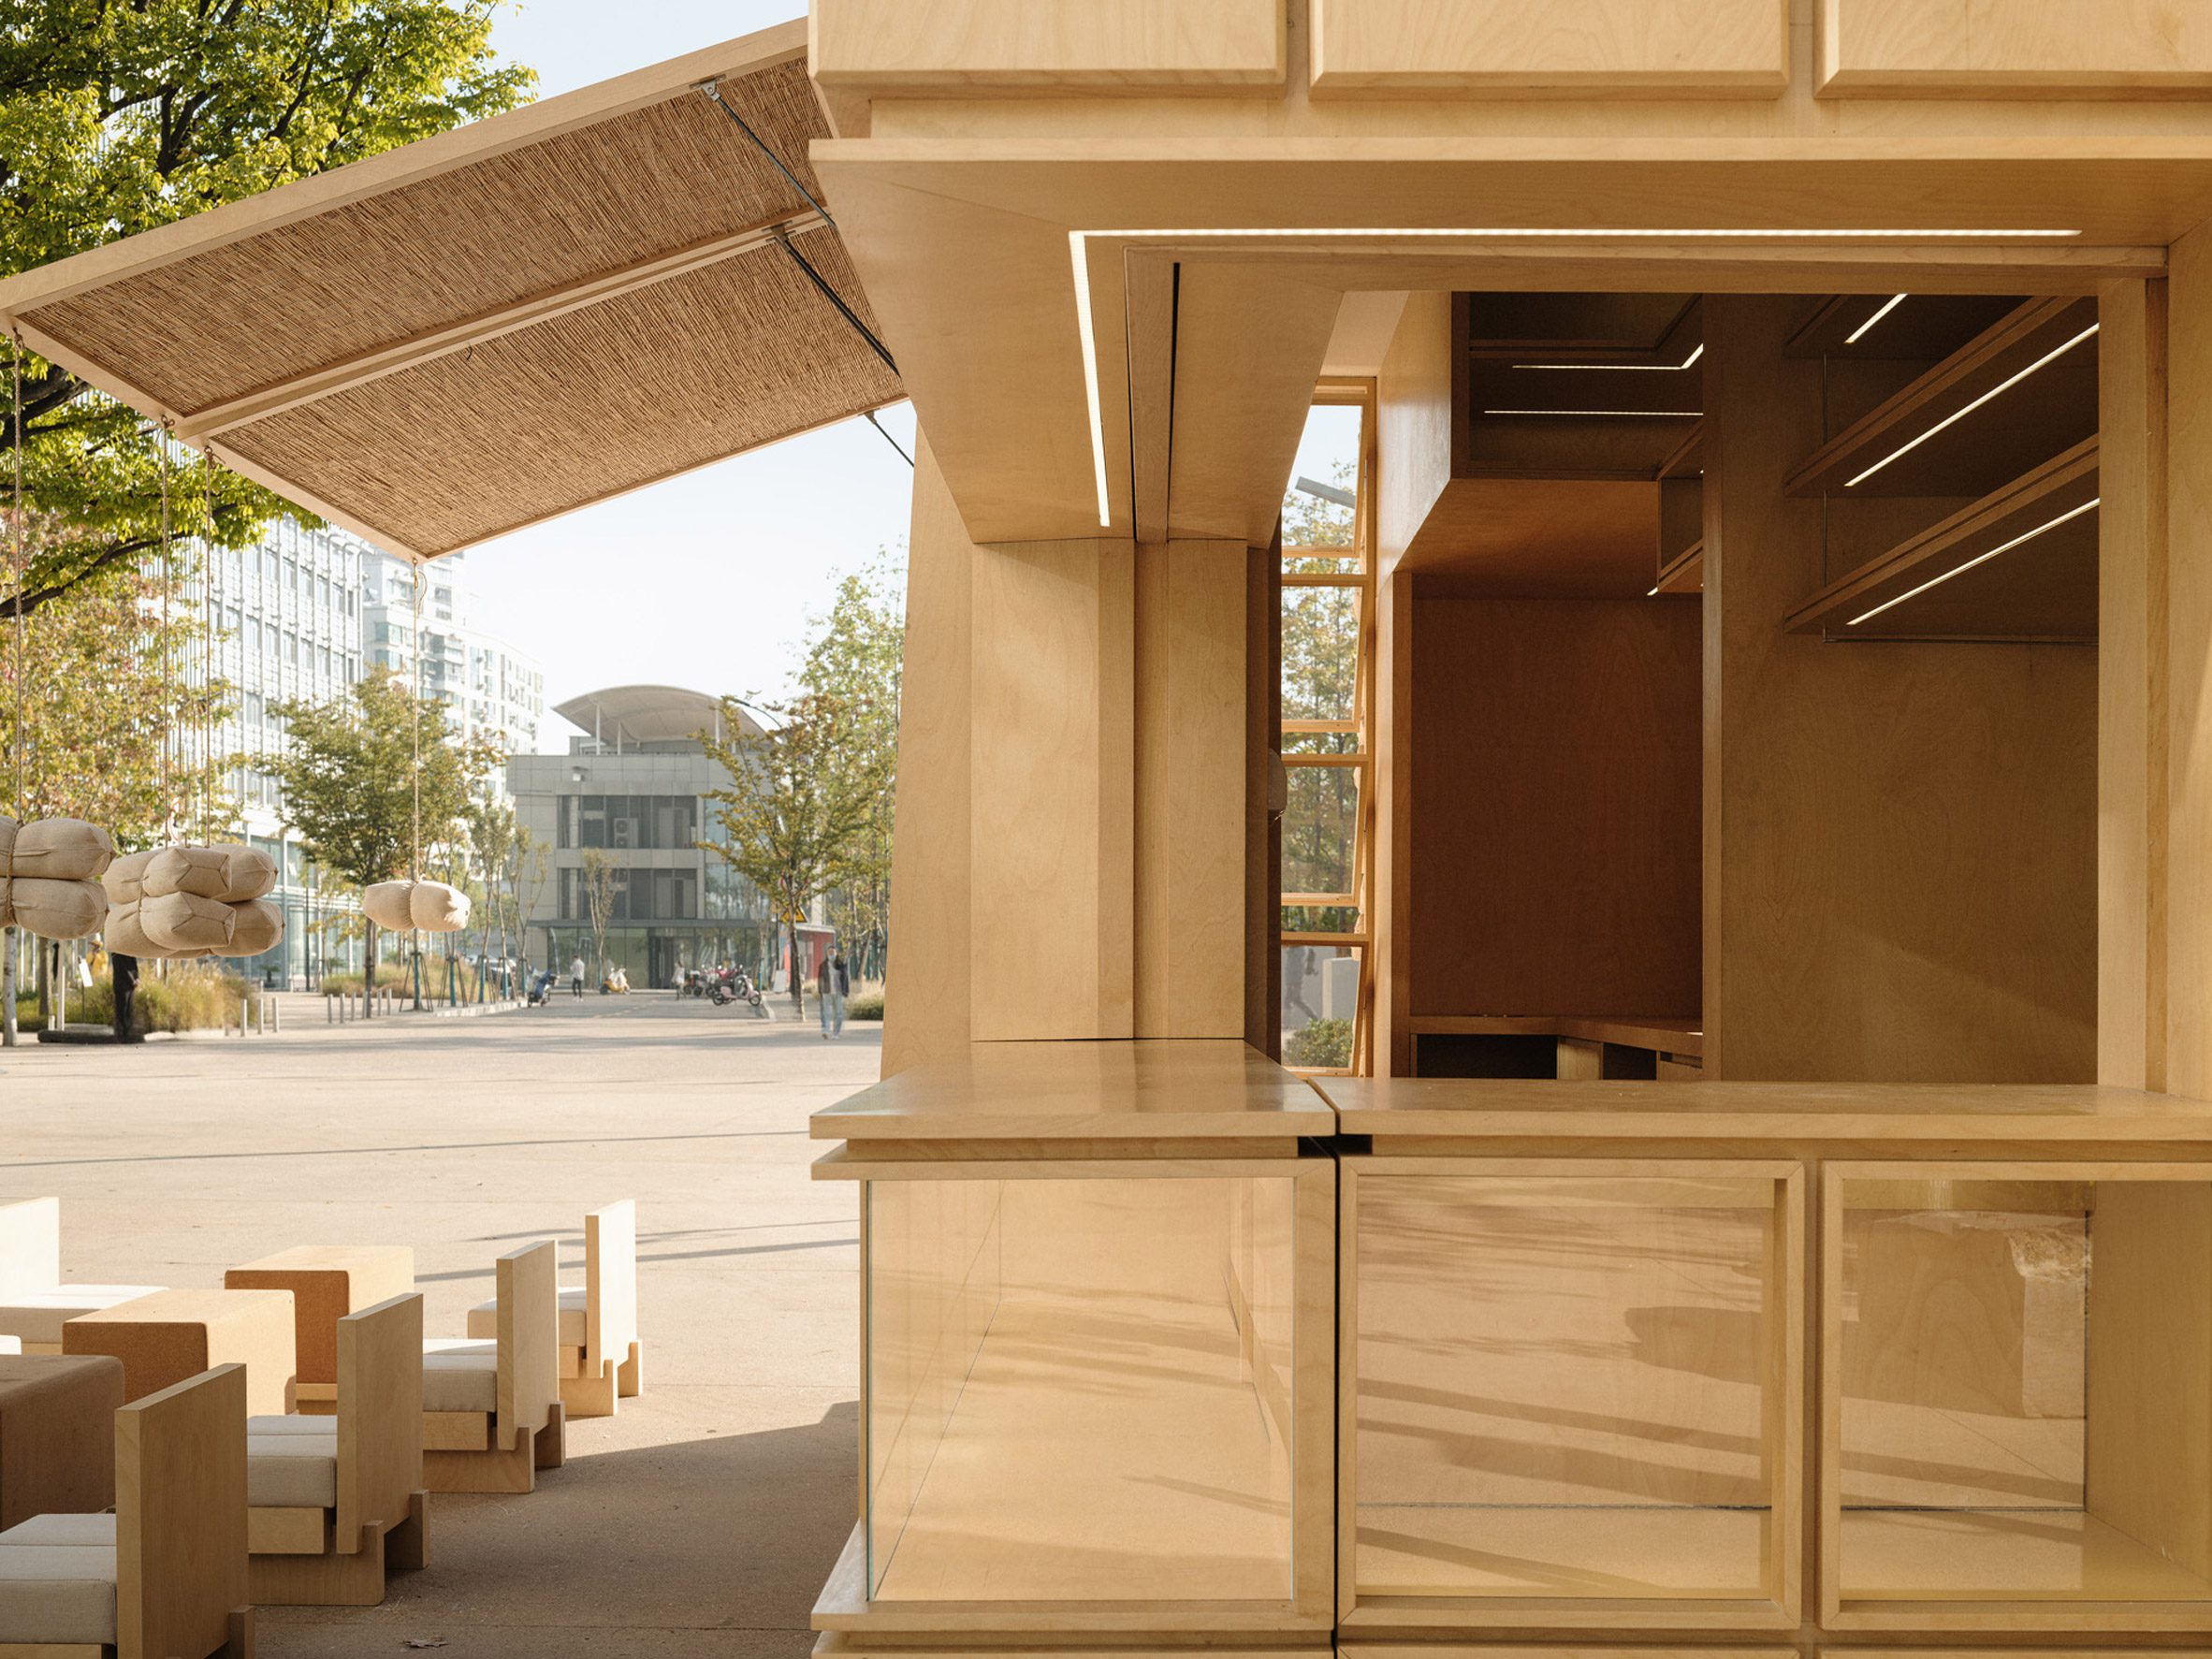 Timber mobile bakery by FOG Architecture